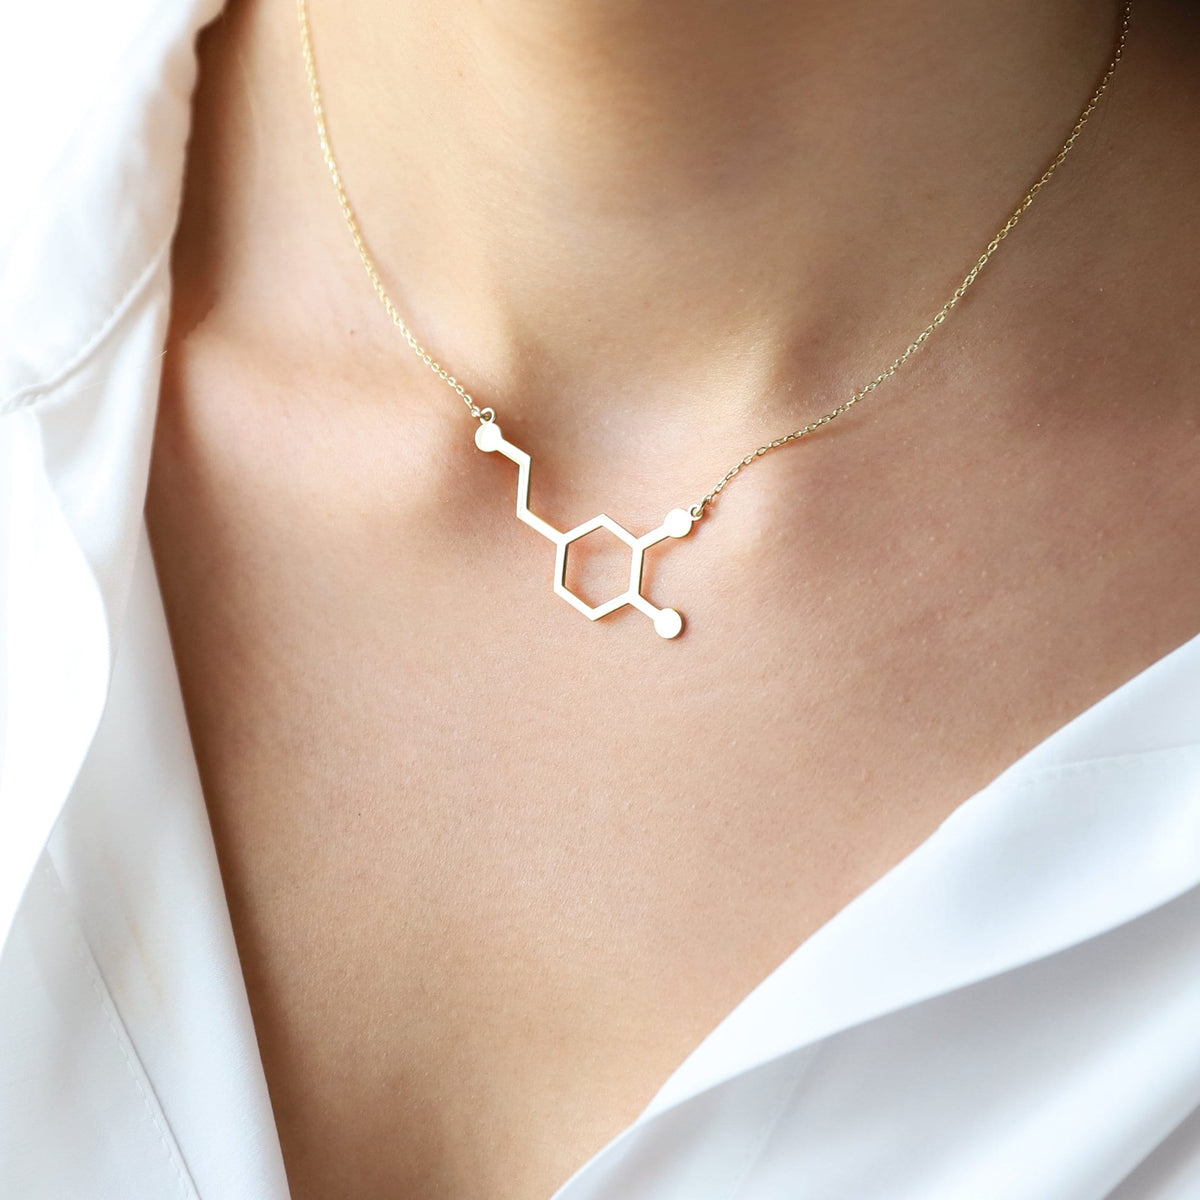 Dopamine Molecule Necklace • Happiness Jewelry • 925 Sterling Silver Necklace • Dopamine Symbol Necklace • Chemistry Gift • Science Jewelry